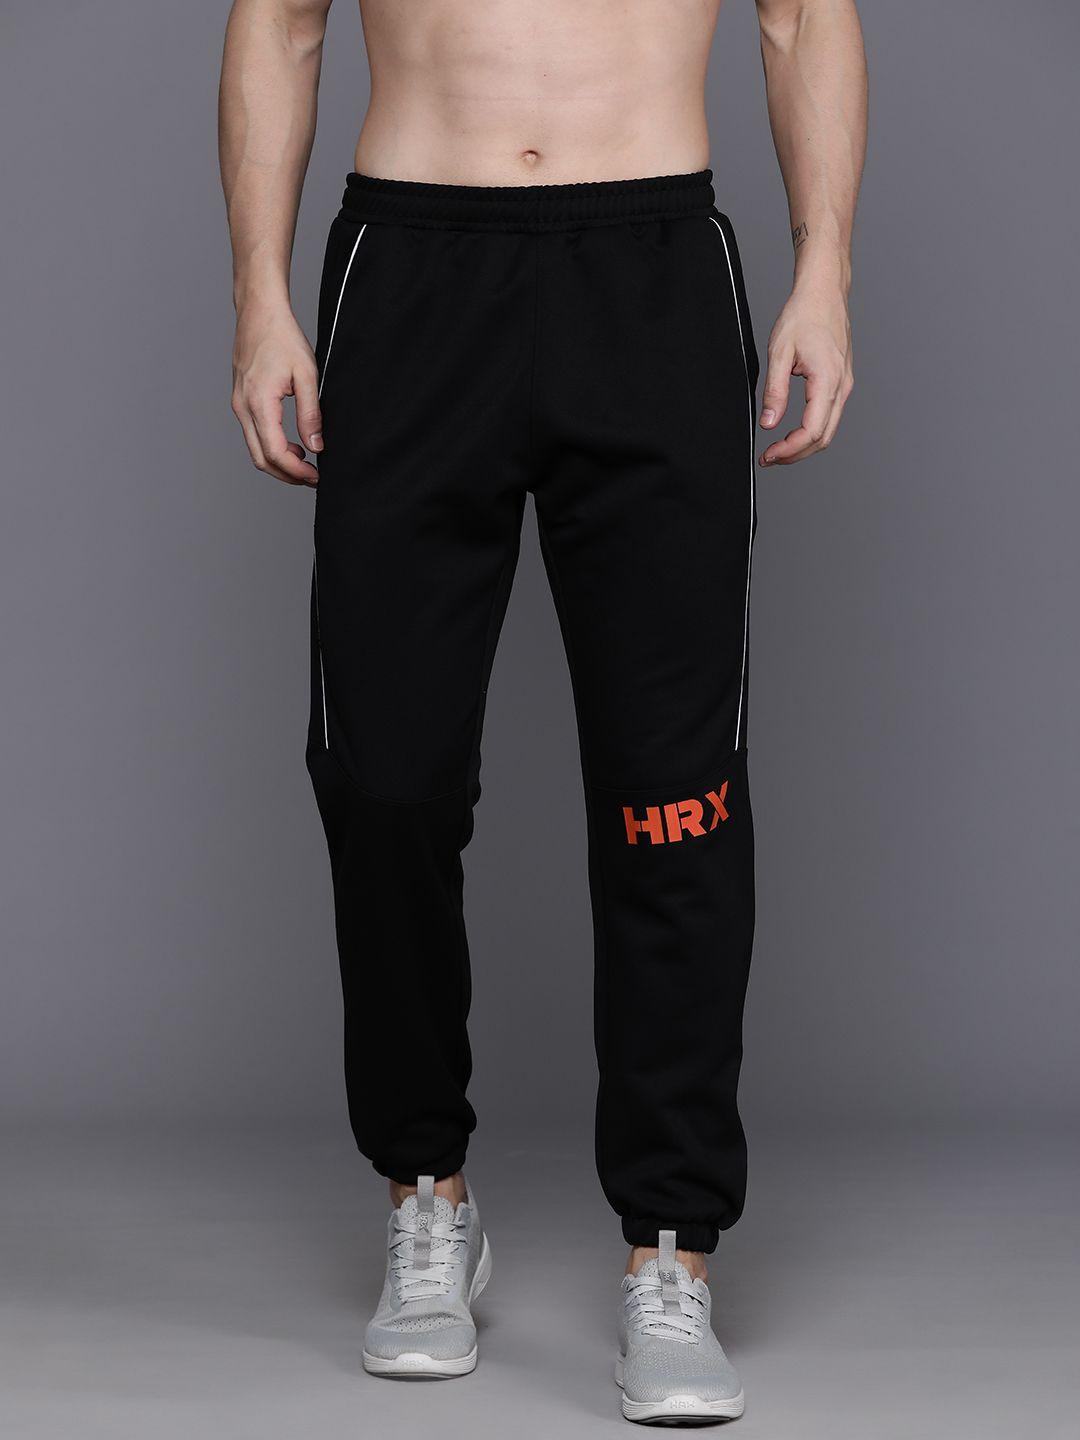 hrx by hrithik roshan men rapid-dry typography training joggers with reflective elements